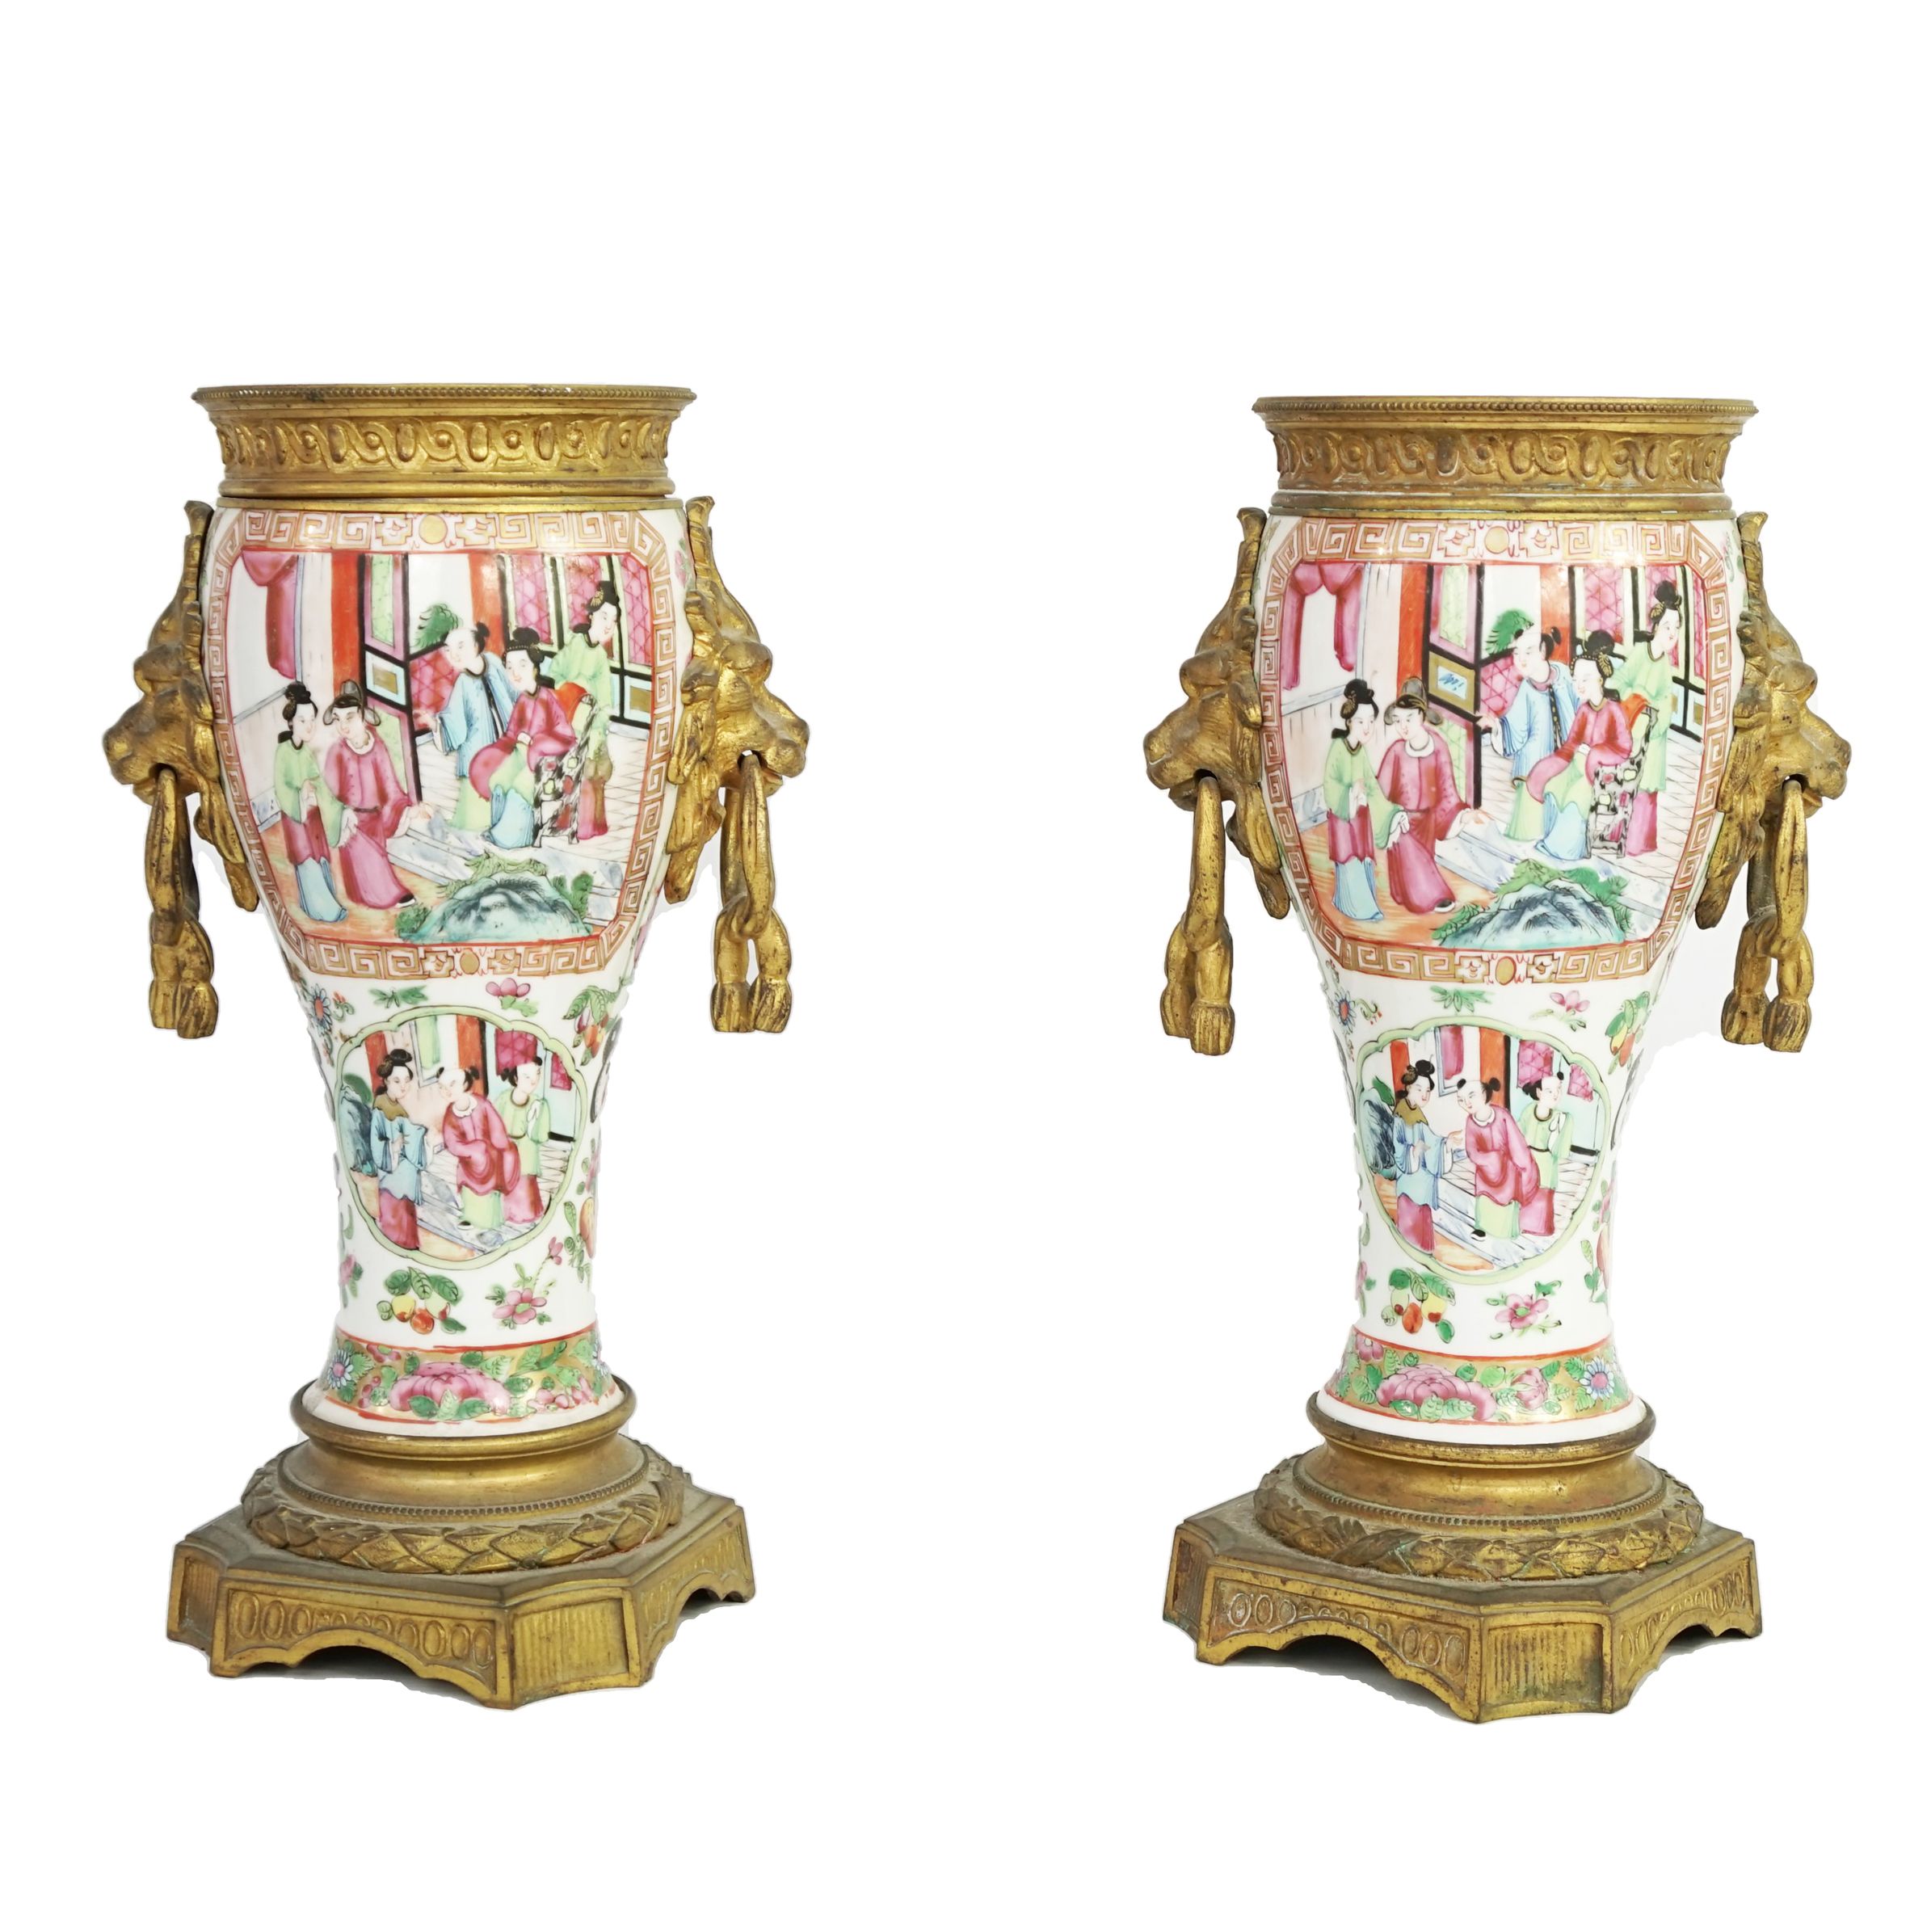 China (late 19th century), pair of porcelain vases